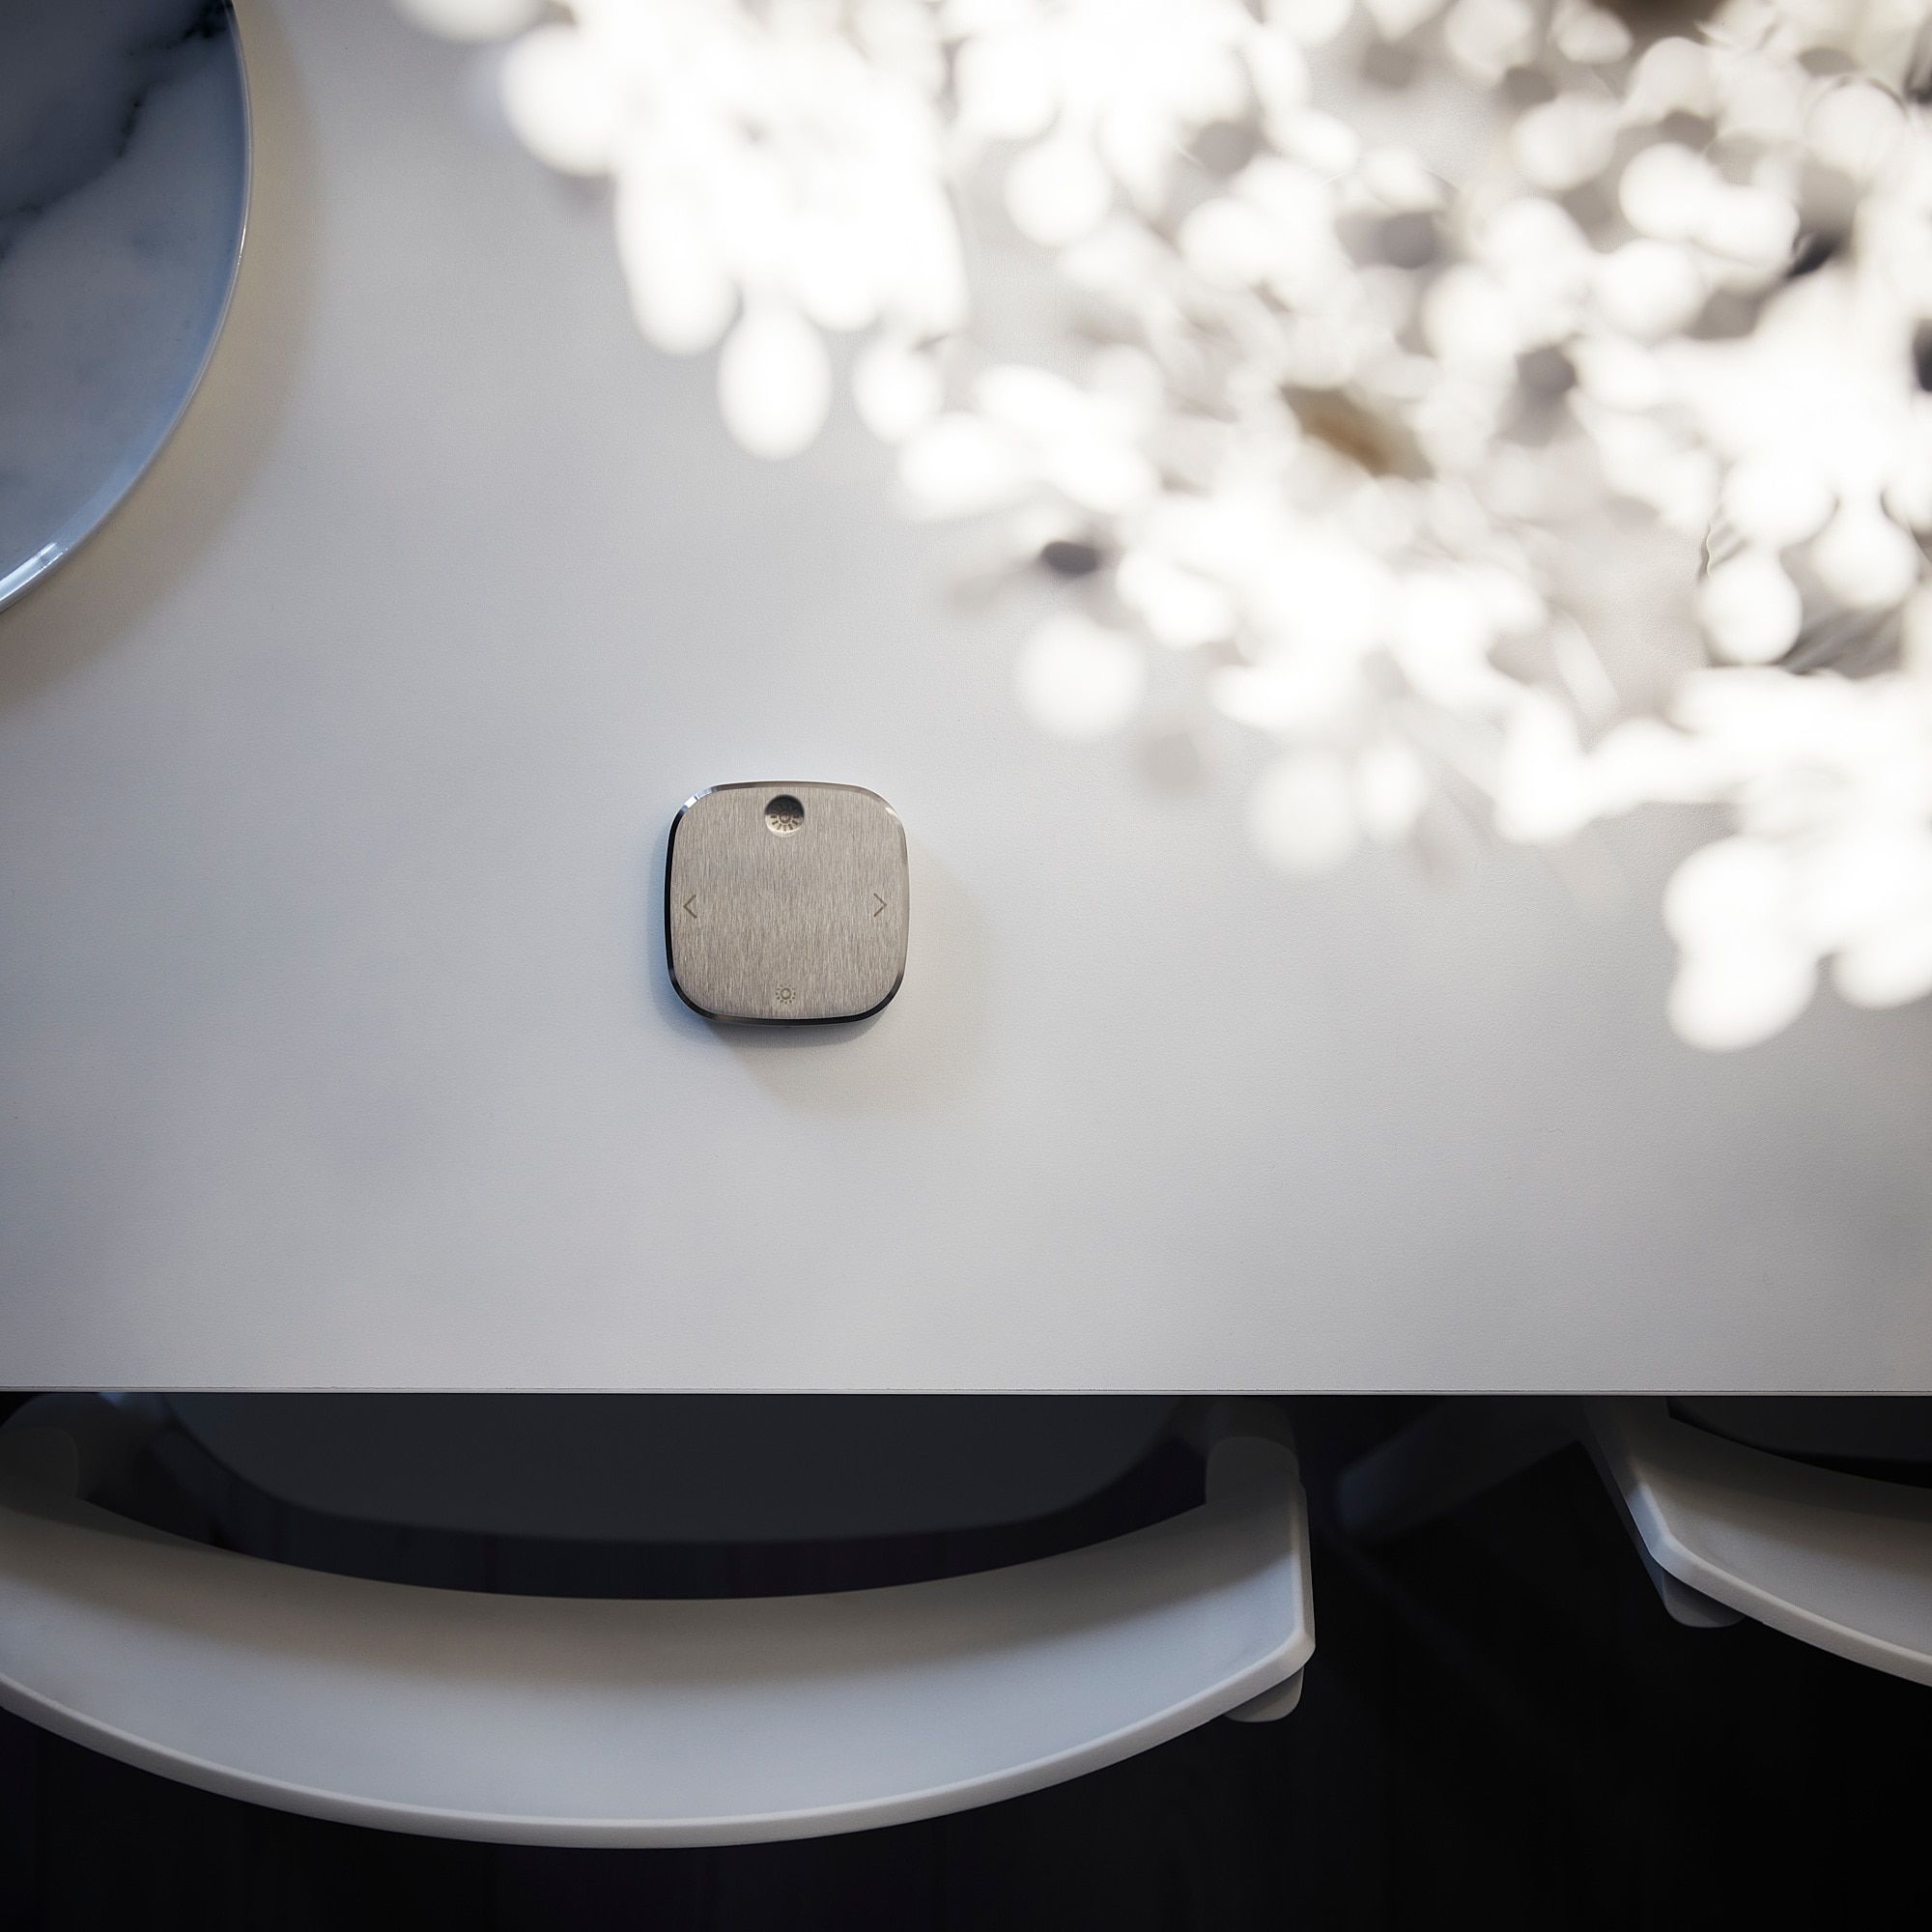 Photo from above a table focusing on the remote, a tiny white square with rounded corners and symbols indicating the 4 basic functions it has